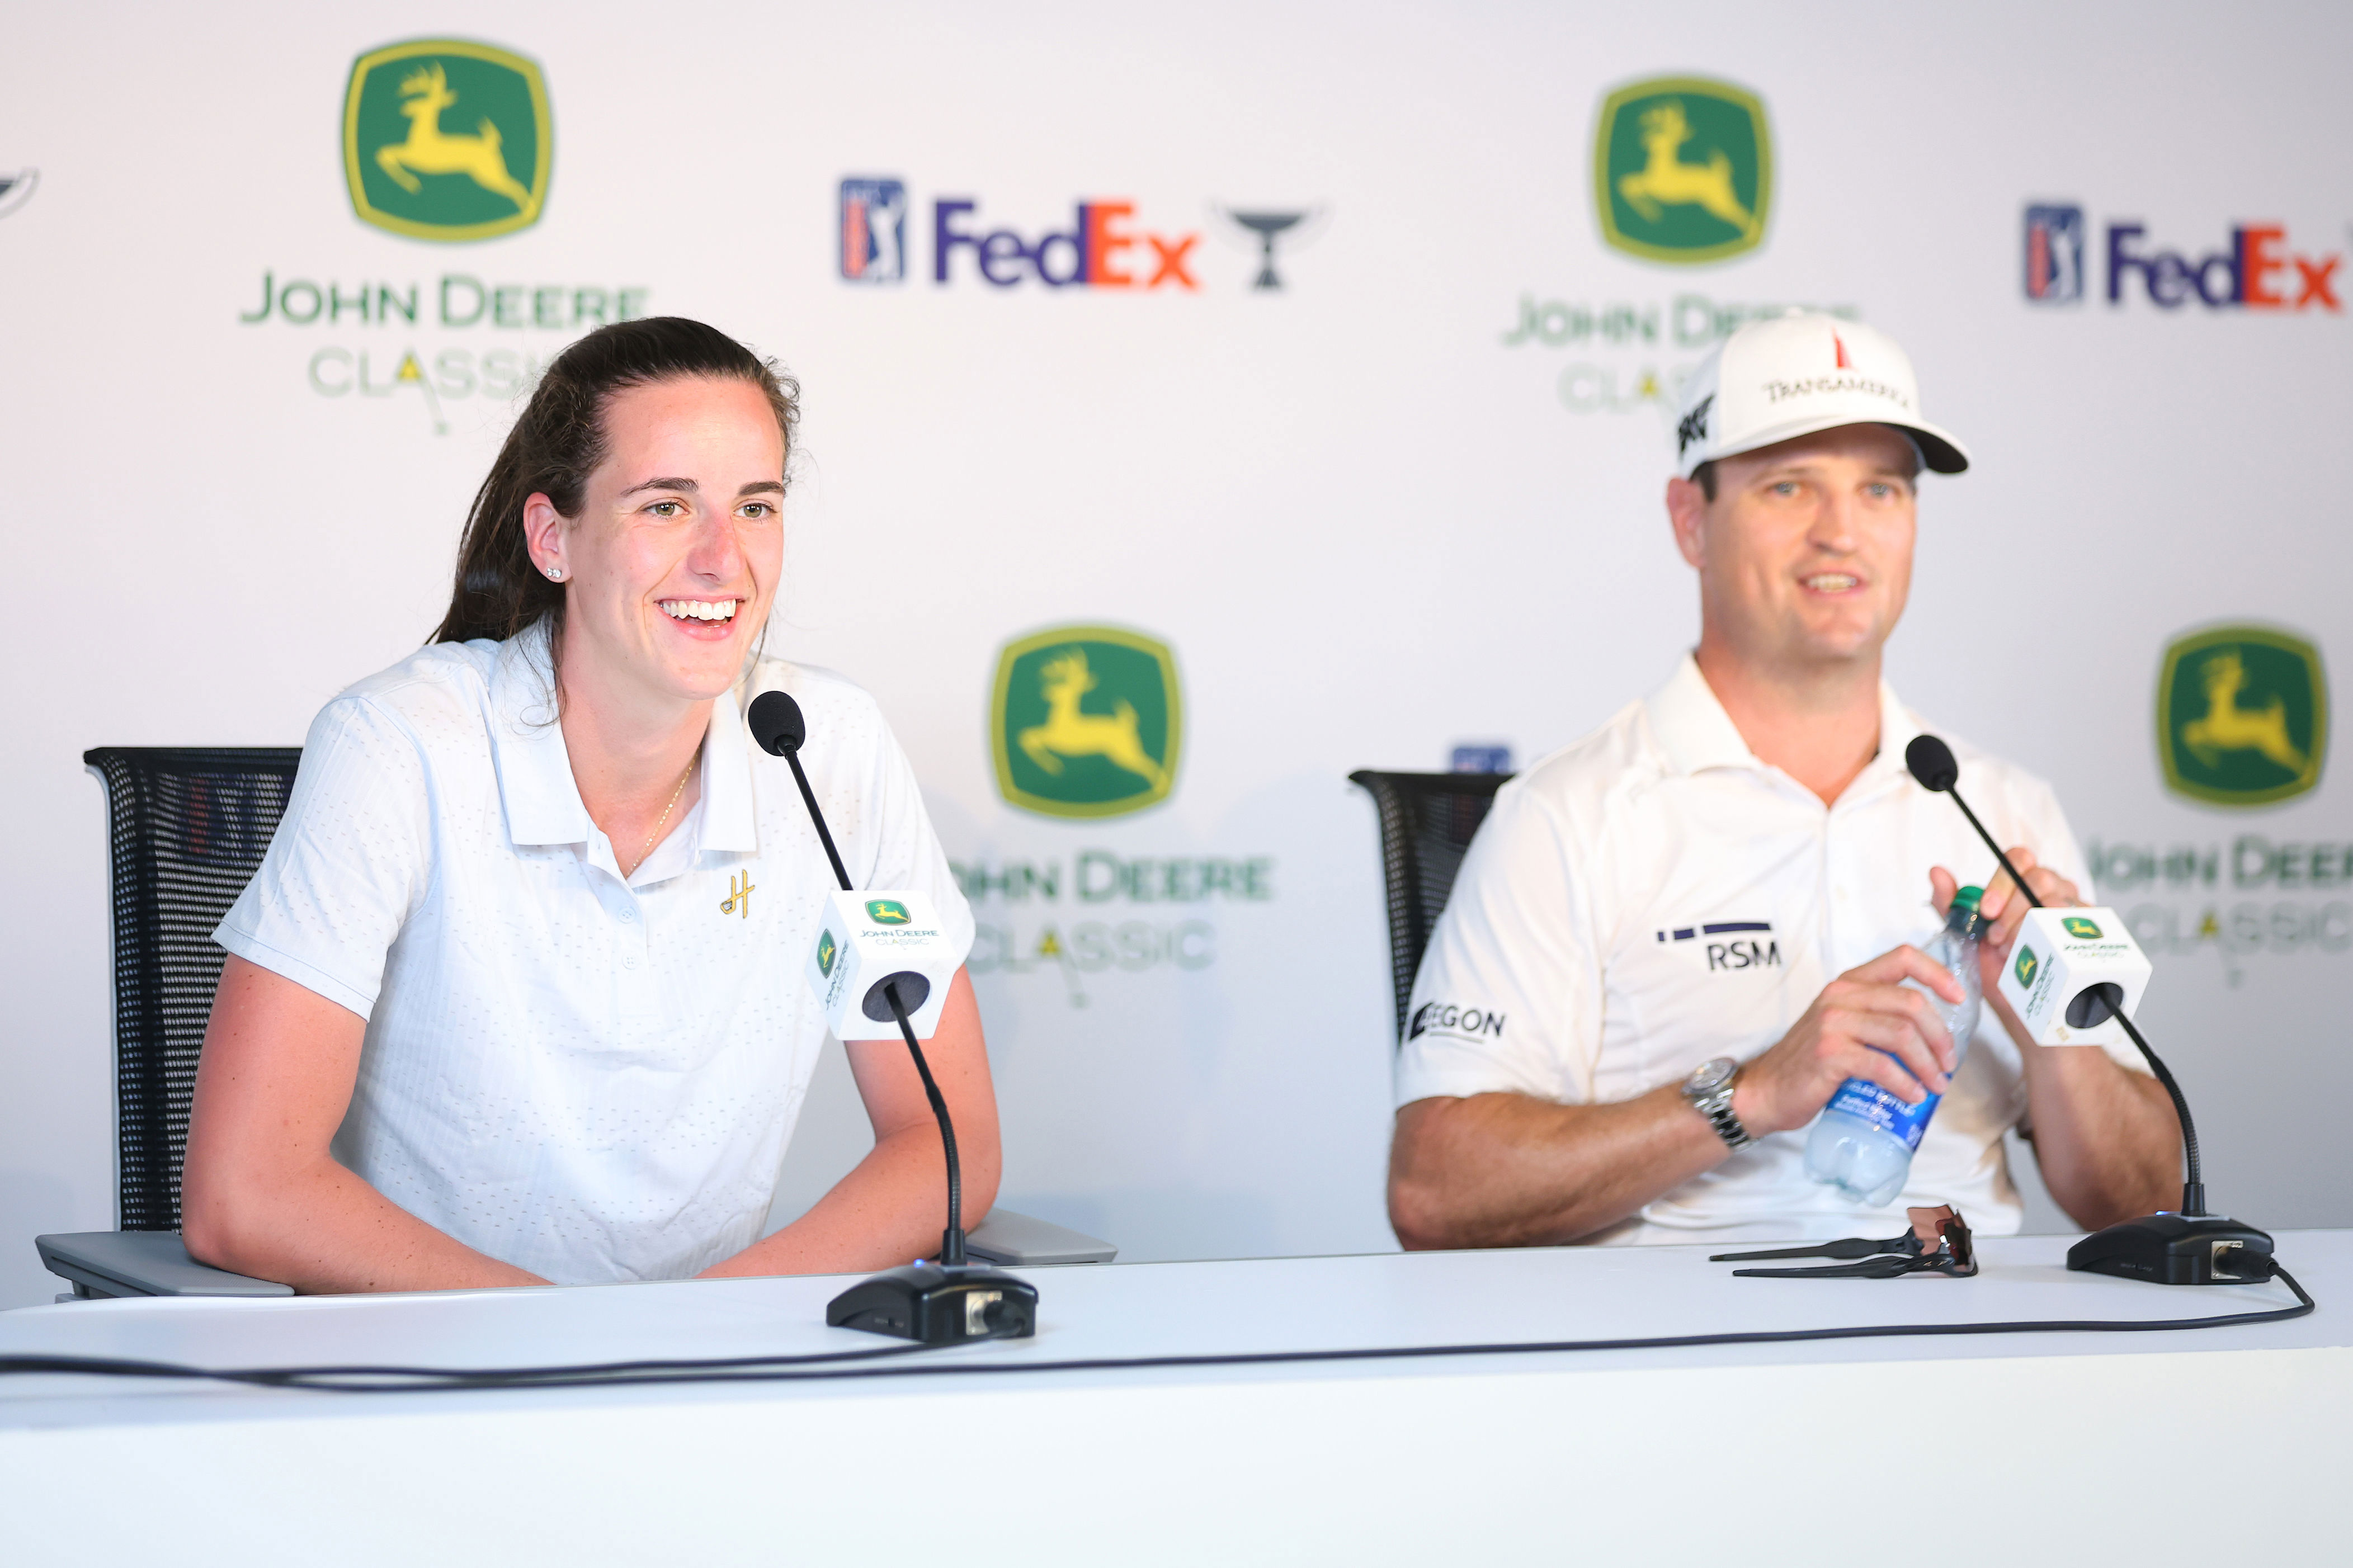 Iowa’s Caitlin Clark and golfer Zach Johnson delivered a hilarious